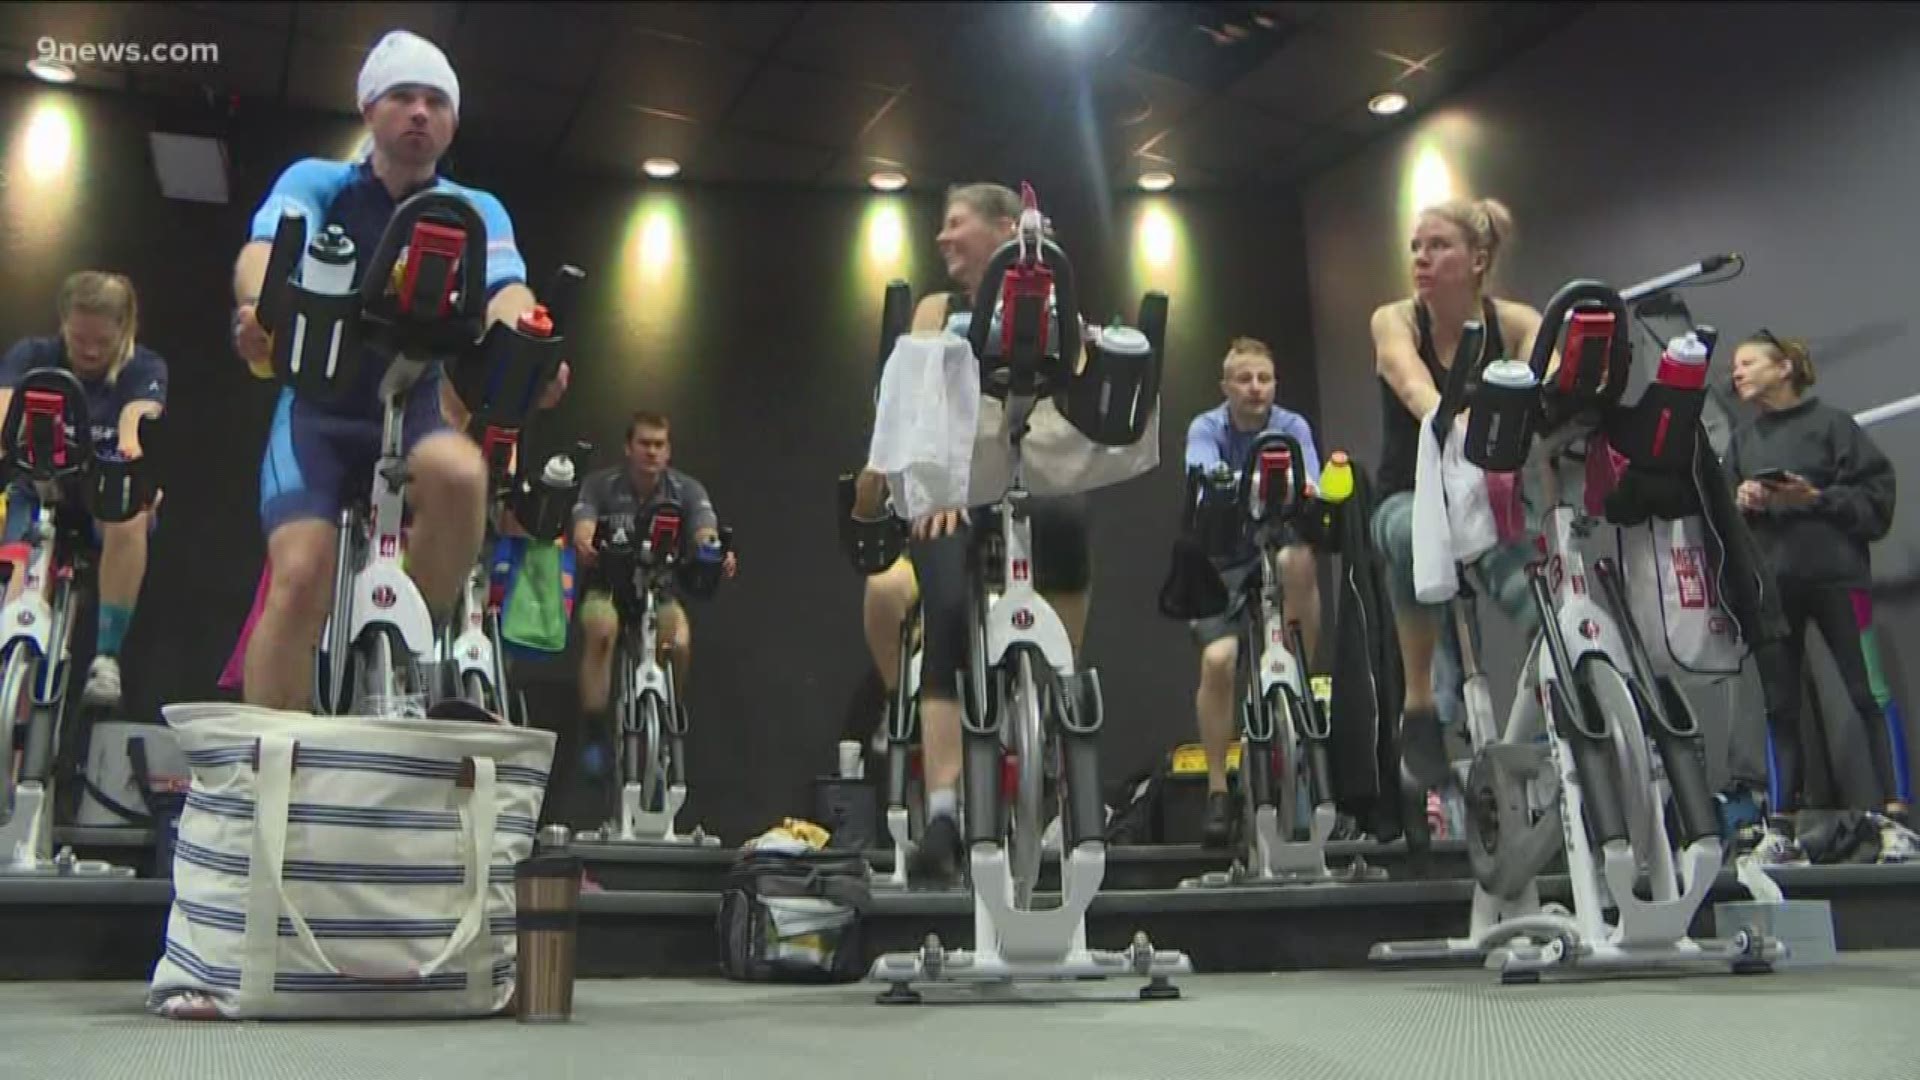 They're here to break a world record 
for the longest static cycling class in history.